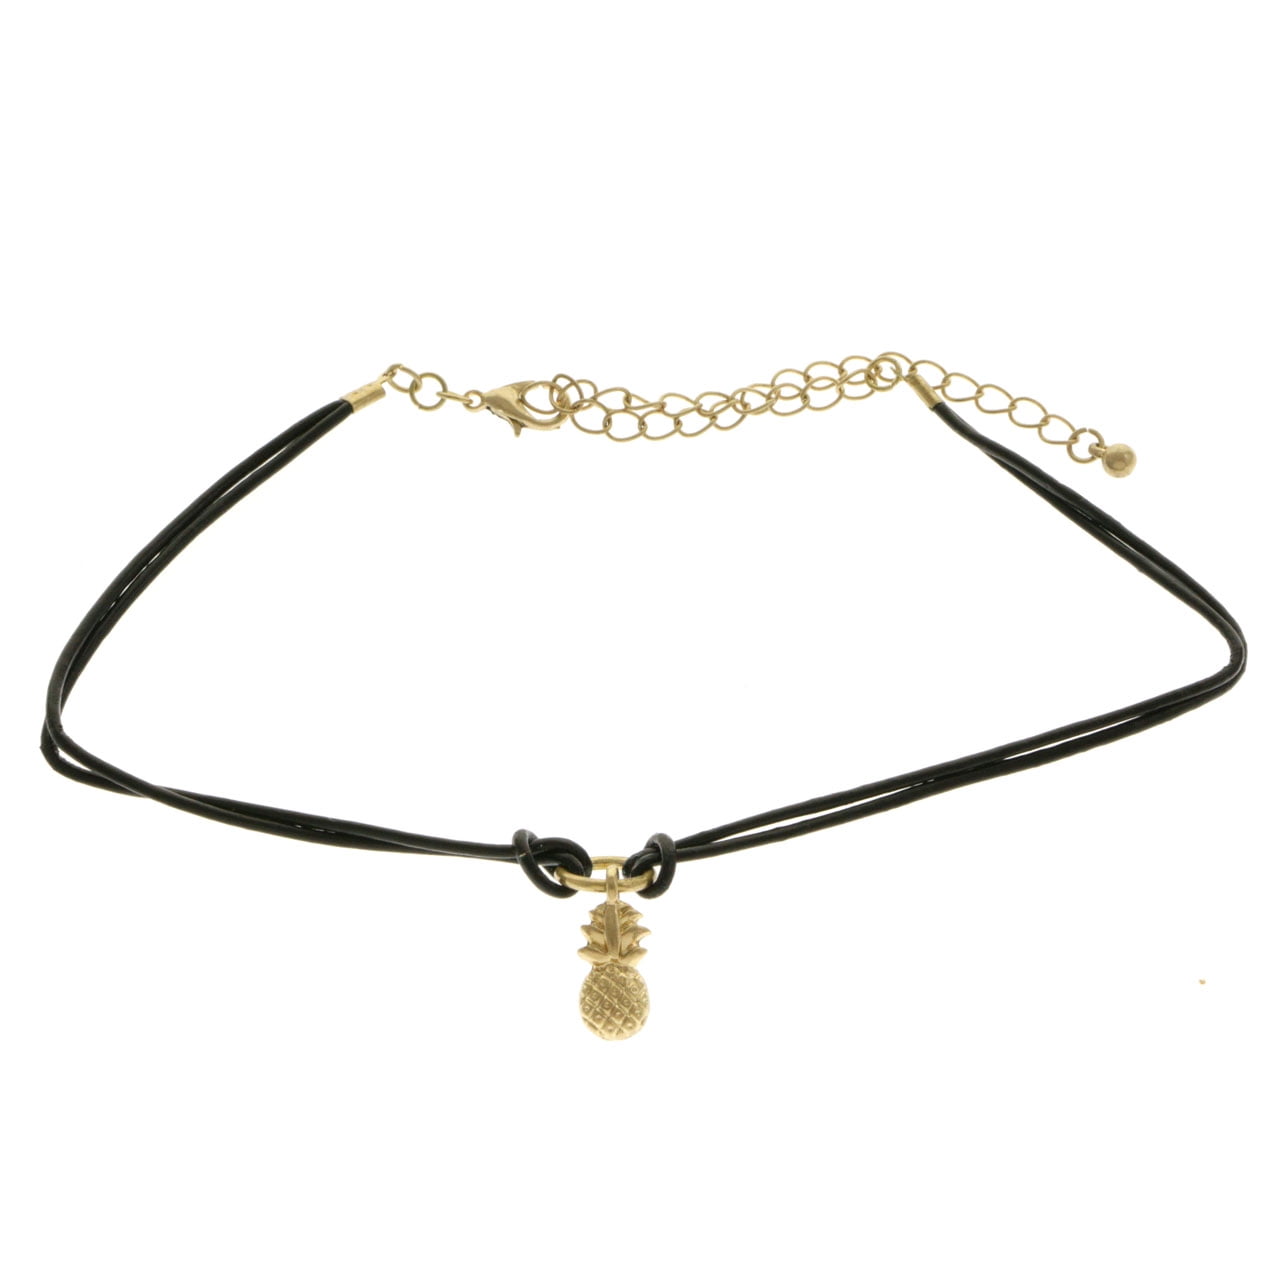 Pineapple Fruit Charm Pendant Choker Necklace with Black Cord 